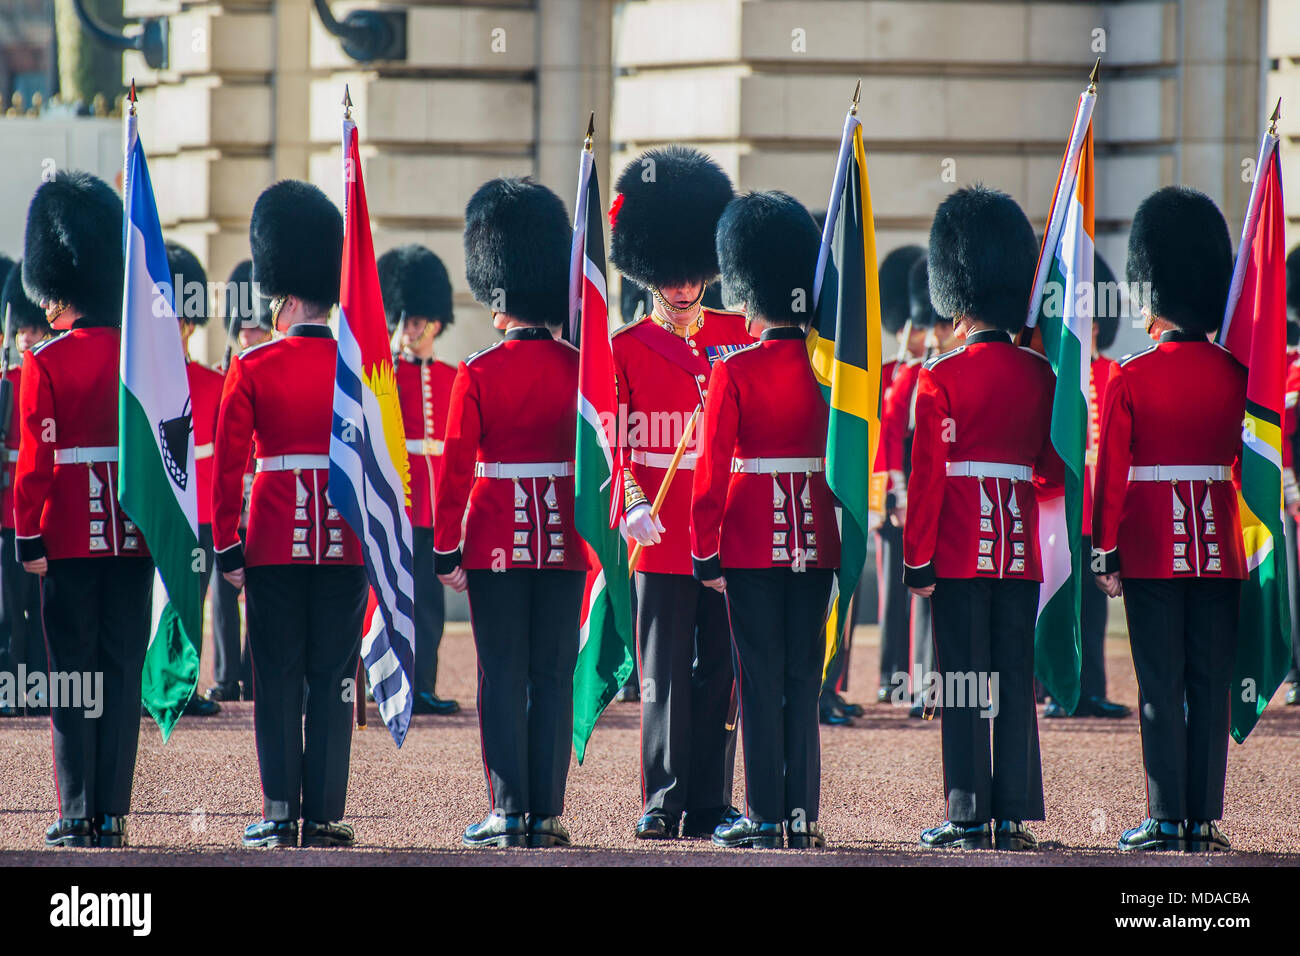 Buckingham Palace, London, UK. 19th Apr, 2018. Inspection - A Guard of Honour, comprised of 104 Officers and soldiers of the Coldstream Guards, accompanied by 55 Flag Bearers of Number 7 Company, Coldstream Guards and the Band and Corps of Drums of the Coldstream Guards at Buckingham Palace. Her Majesty The Queen welcomes the Commonwealth Heads of Government to Buckingham Palace for the formal opening of the summit. Credit: Guy Bell/Alamy Live News Stock Photo